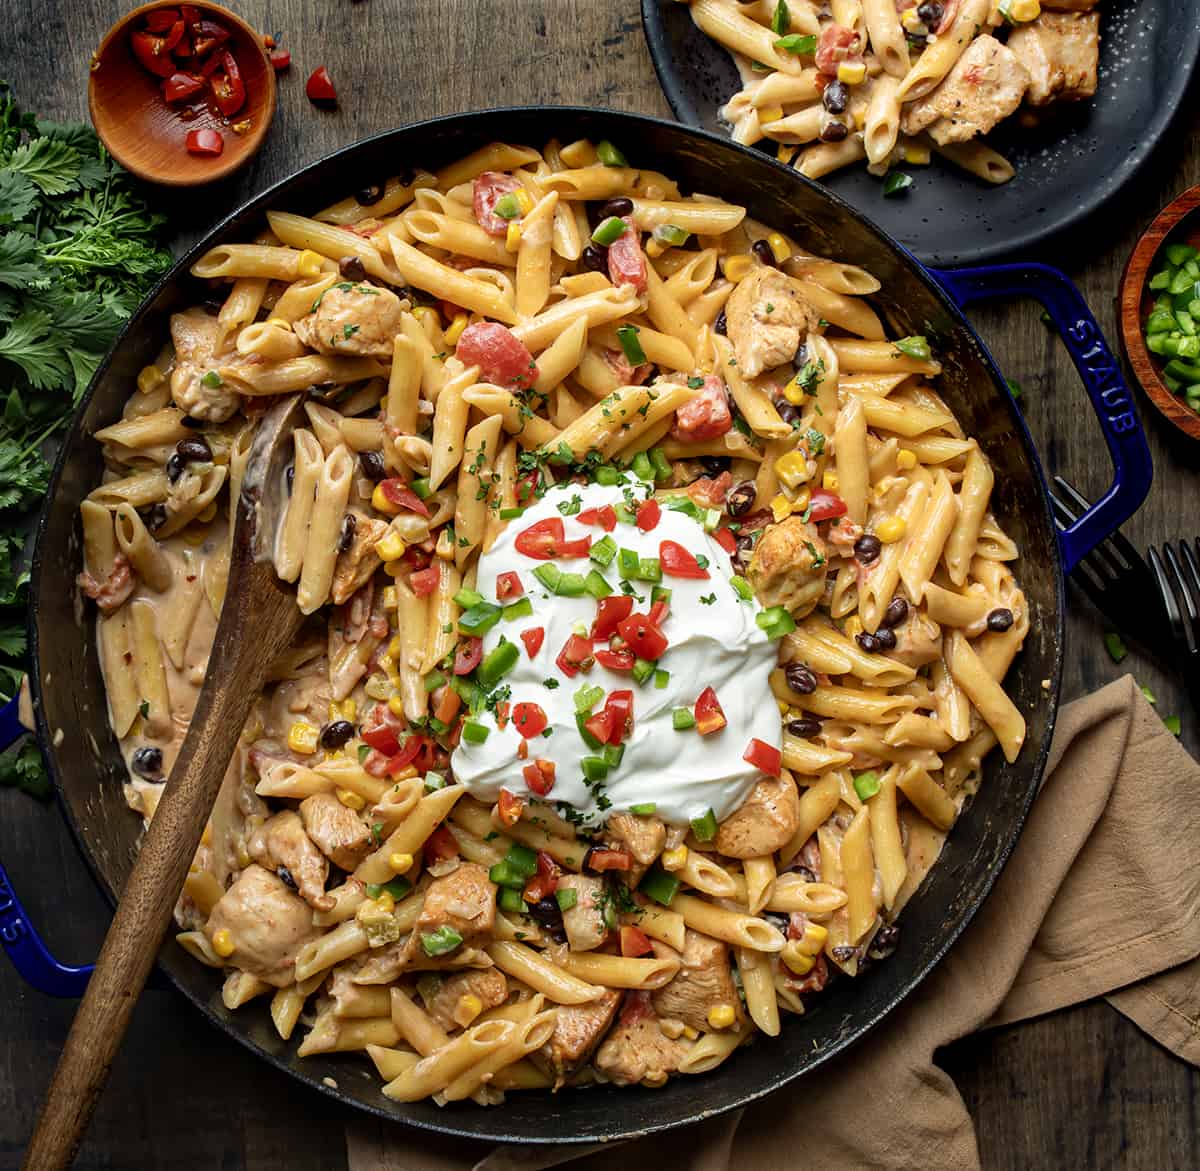 Skillet of Southwest Chicken Pasta with a Wooden Spoon and Some on a Plate Next to the Skillet from Overhead.